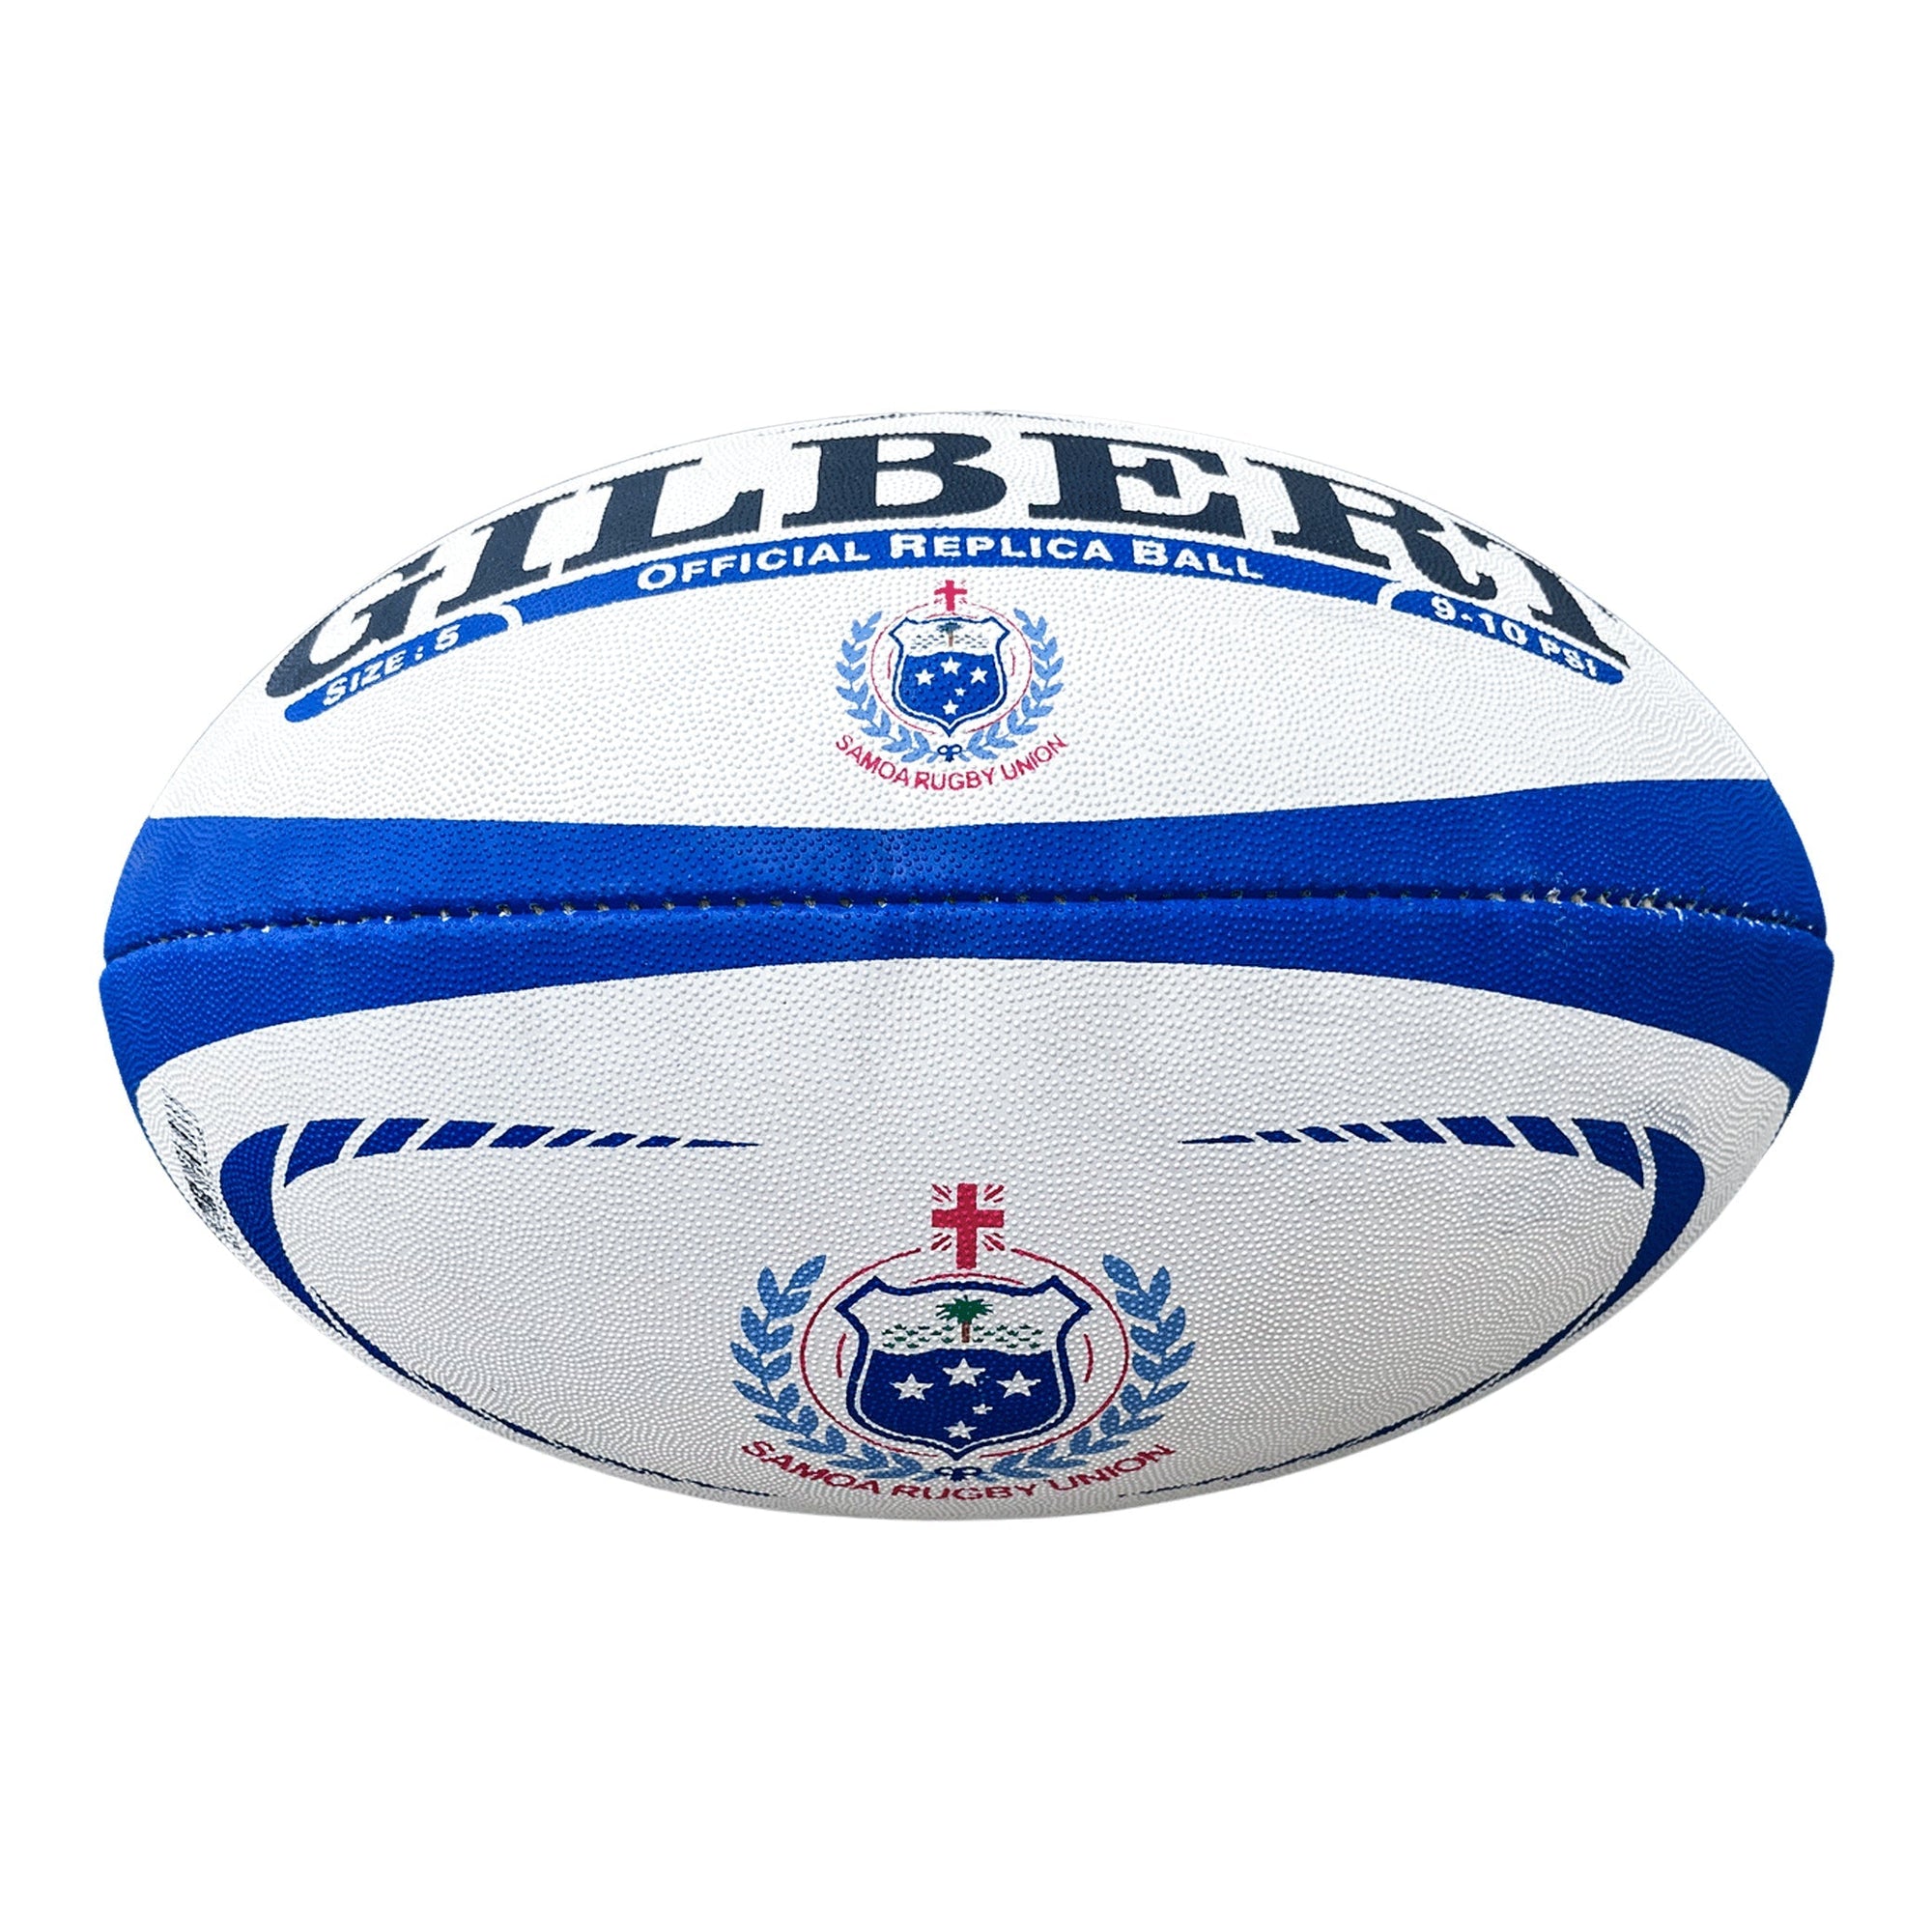 Rugby Imports Gilbert Samoa Replica Rugby Ball